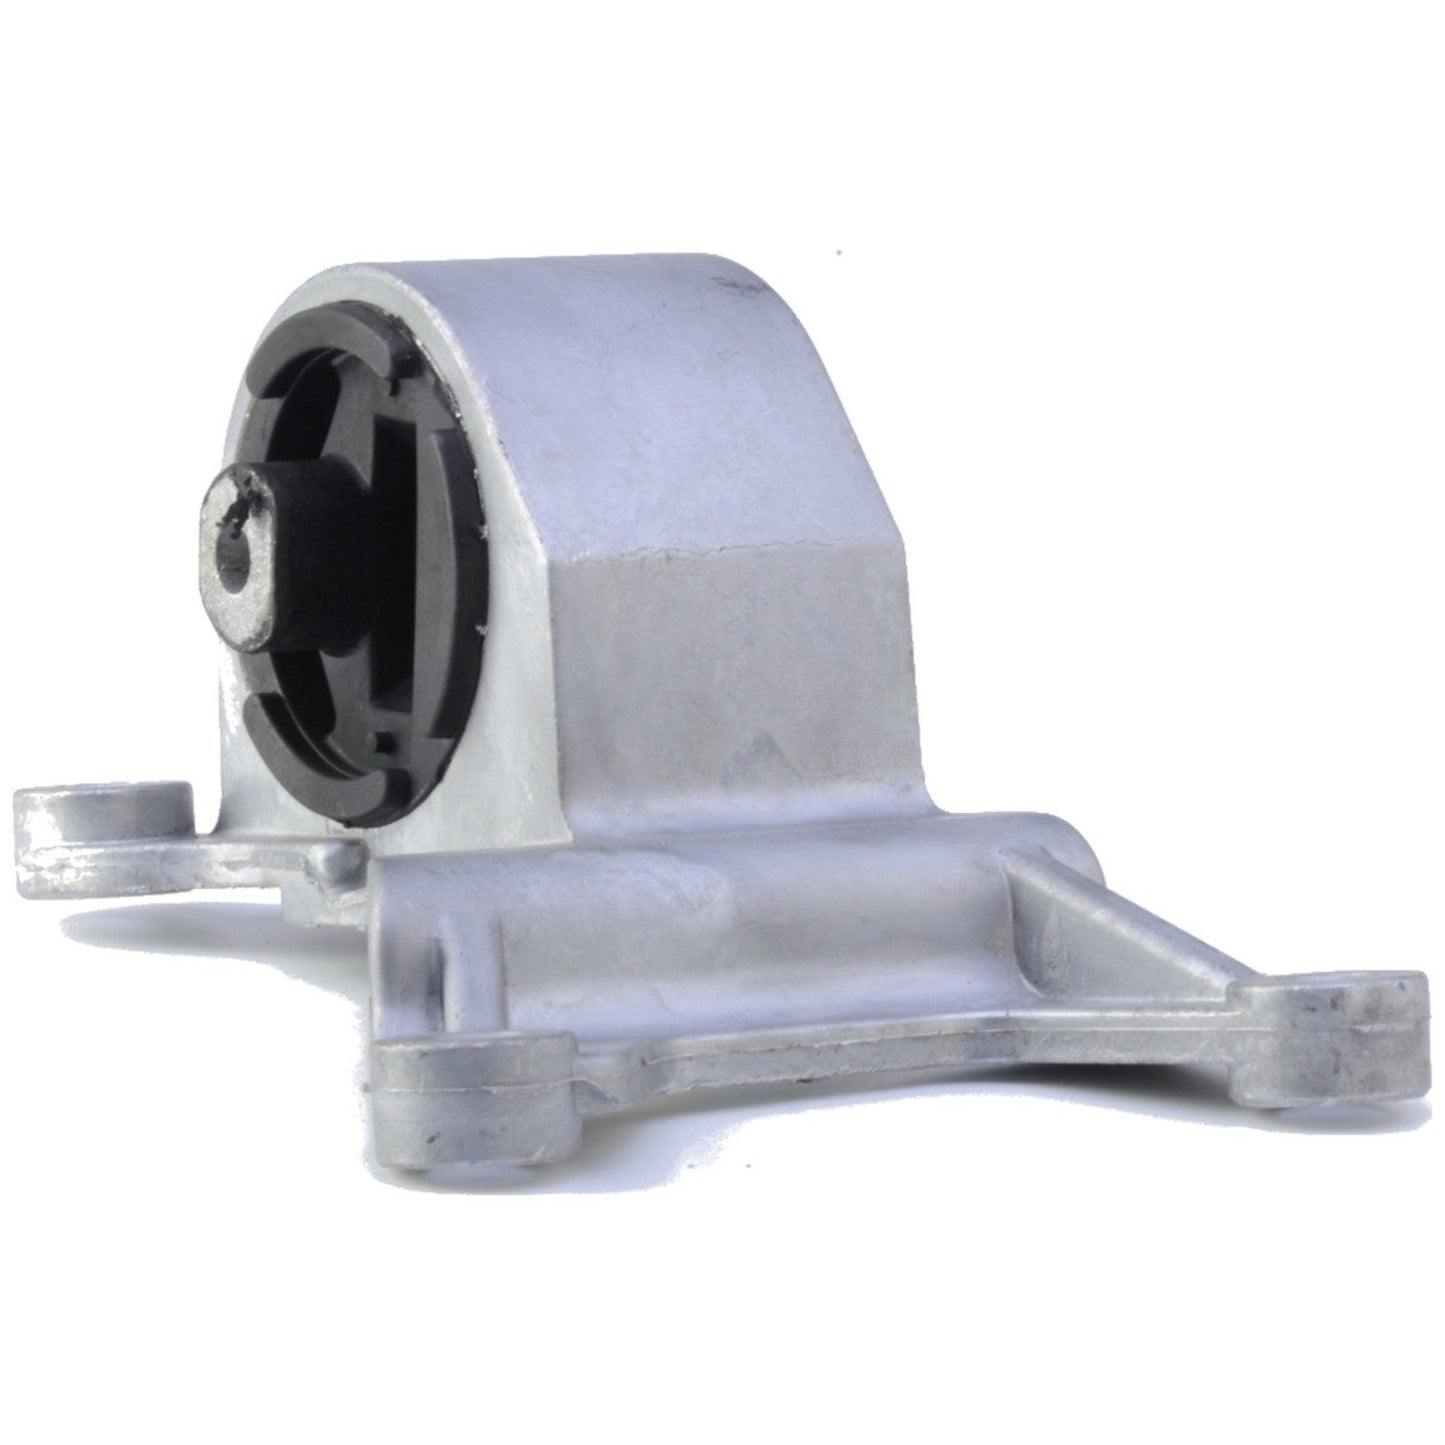 Left View of Left Automatic Transmission Mount ANCHOR 2874